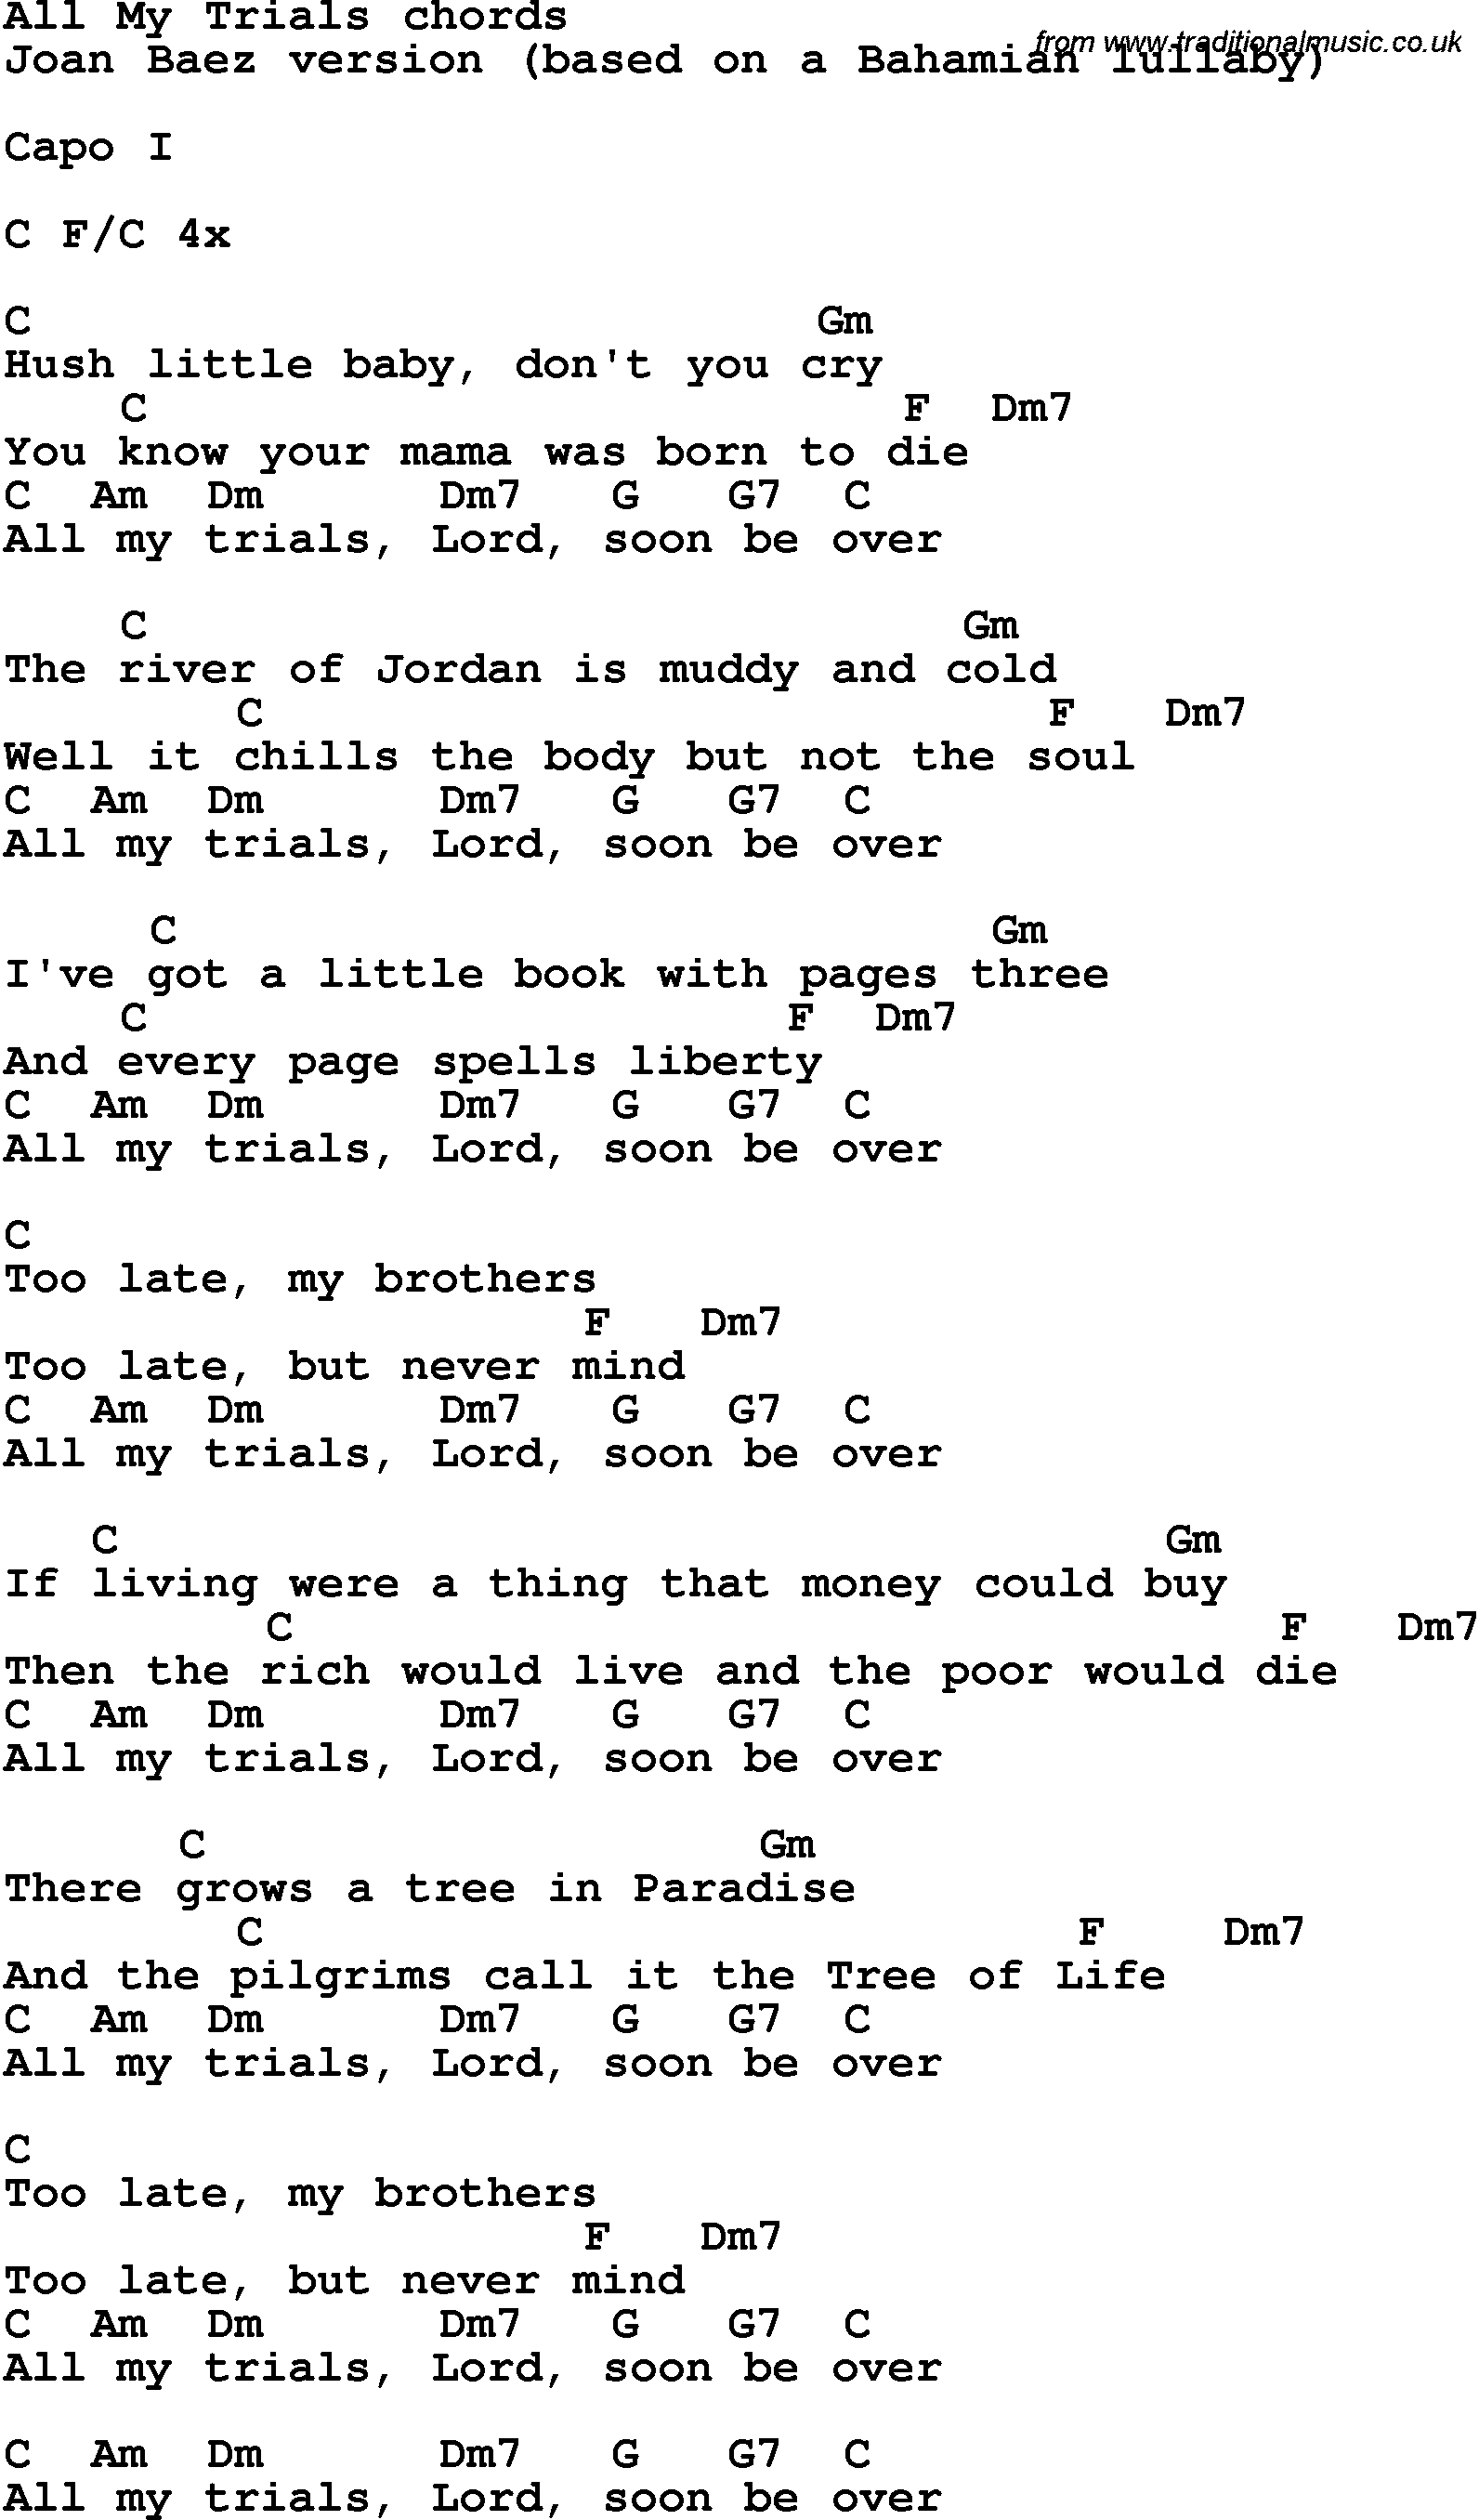 Simple Man Chords Song Lyrics With Guitar Chords For All My Trials Joan Baez